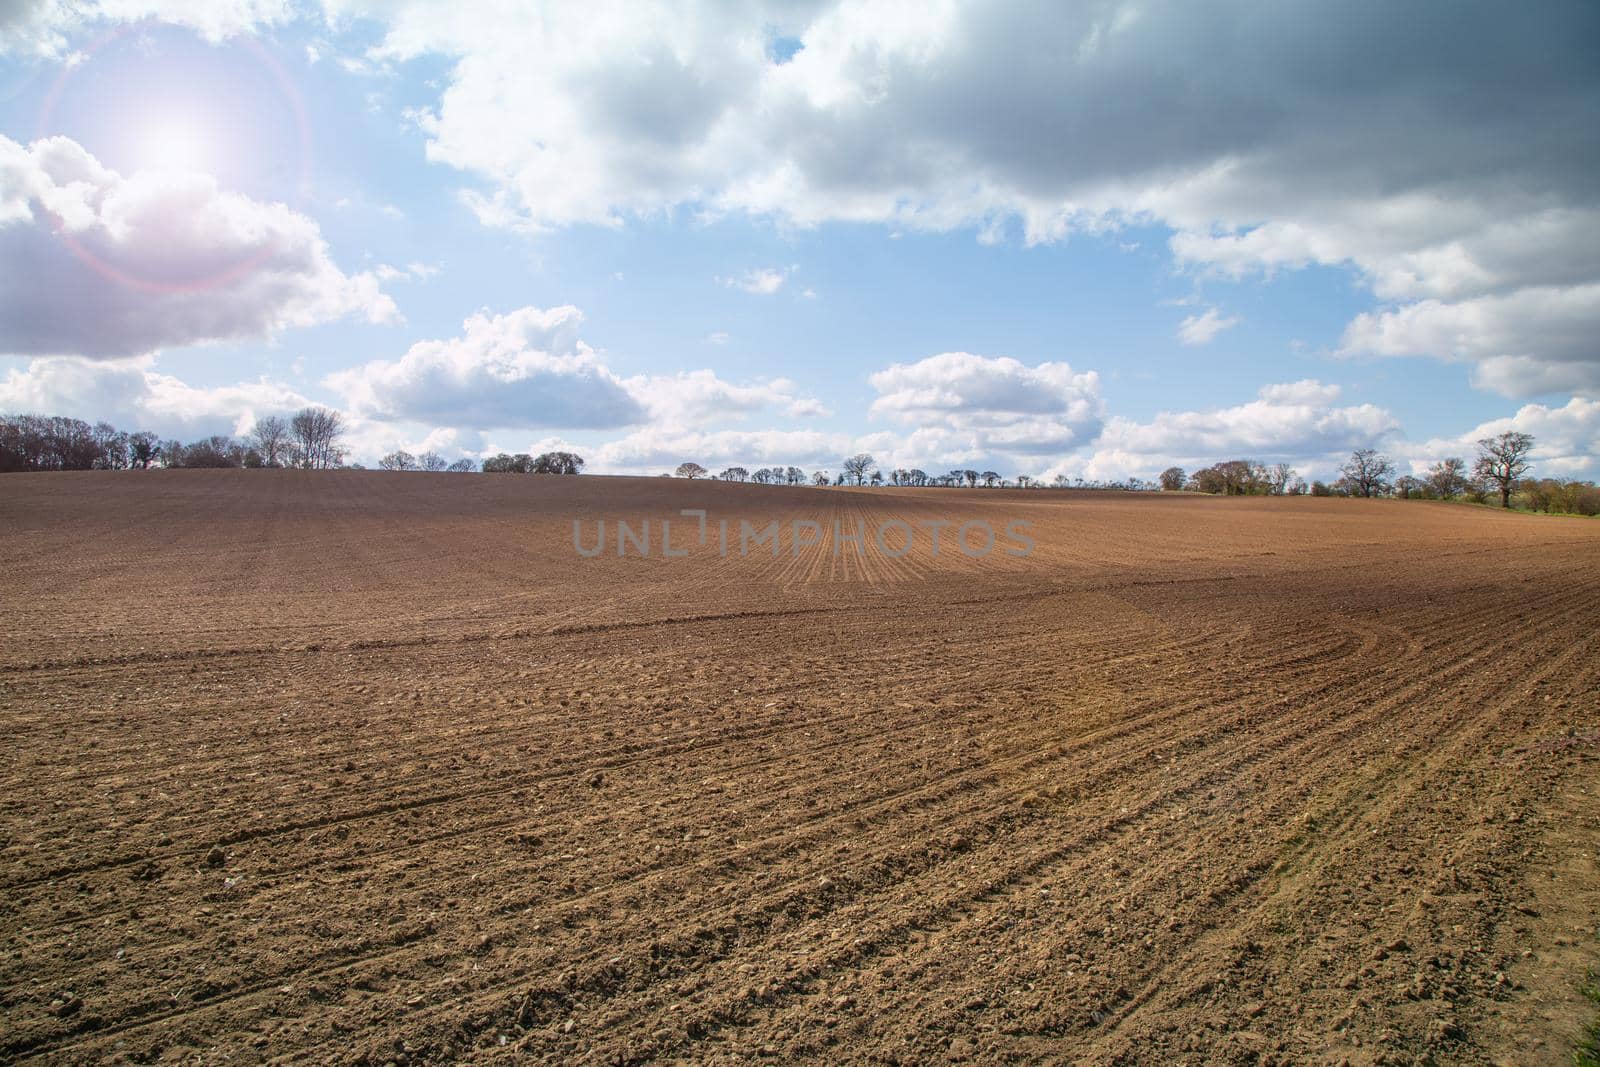 Plowed agricultural spring field during sunny day, dramatic sky, soil texture close up. Rural scene. Farm and food industry. Furrows row pattern in a plowed field in spring. Horizontal perspective